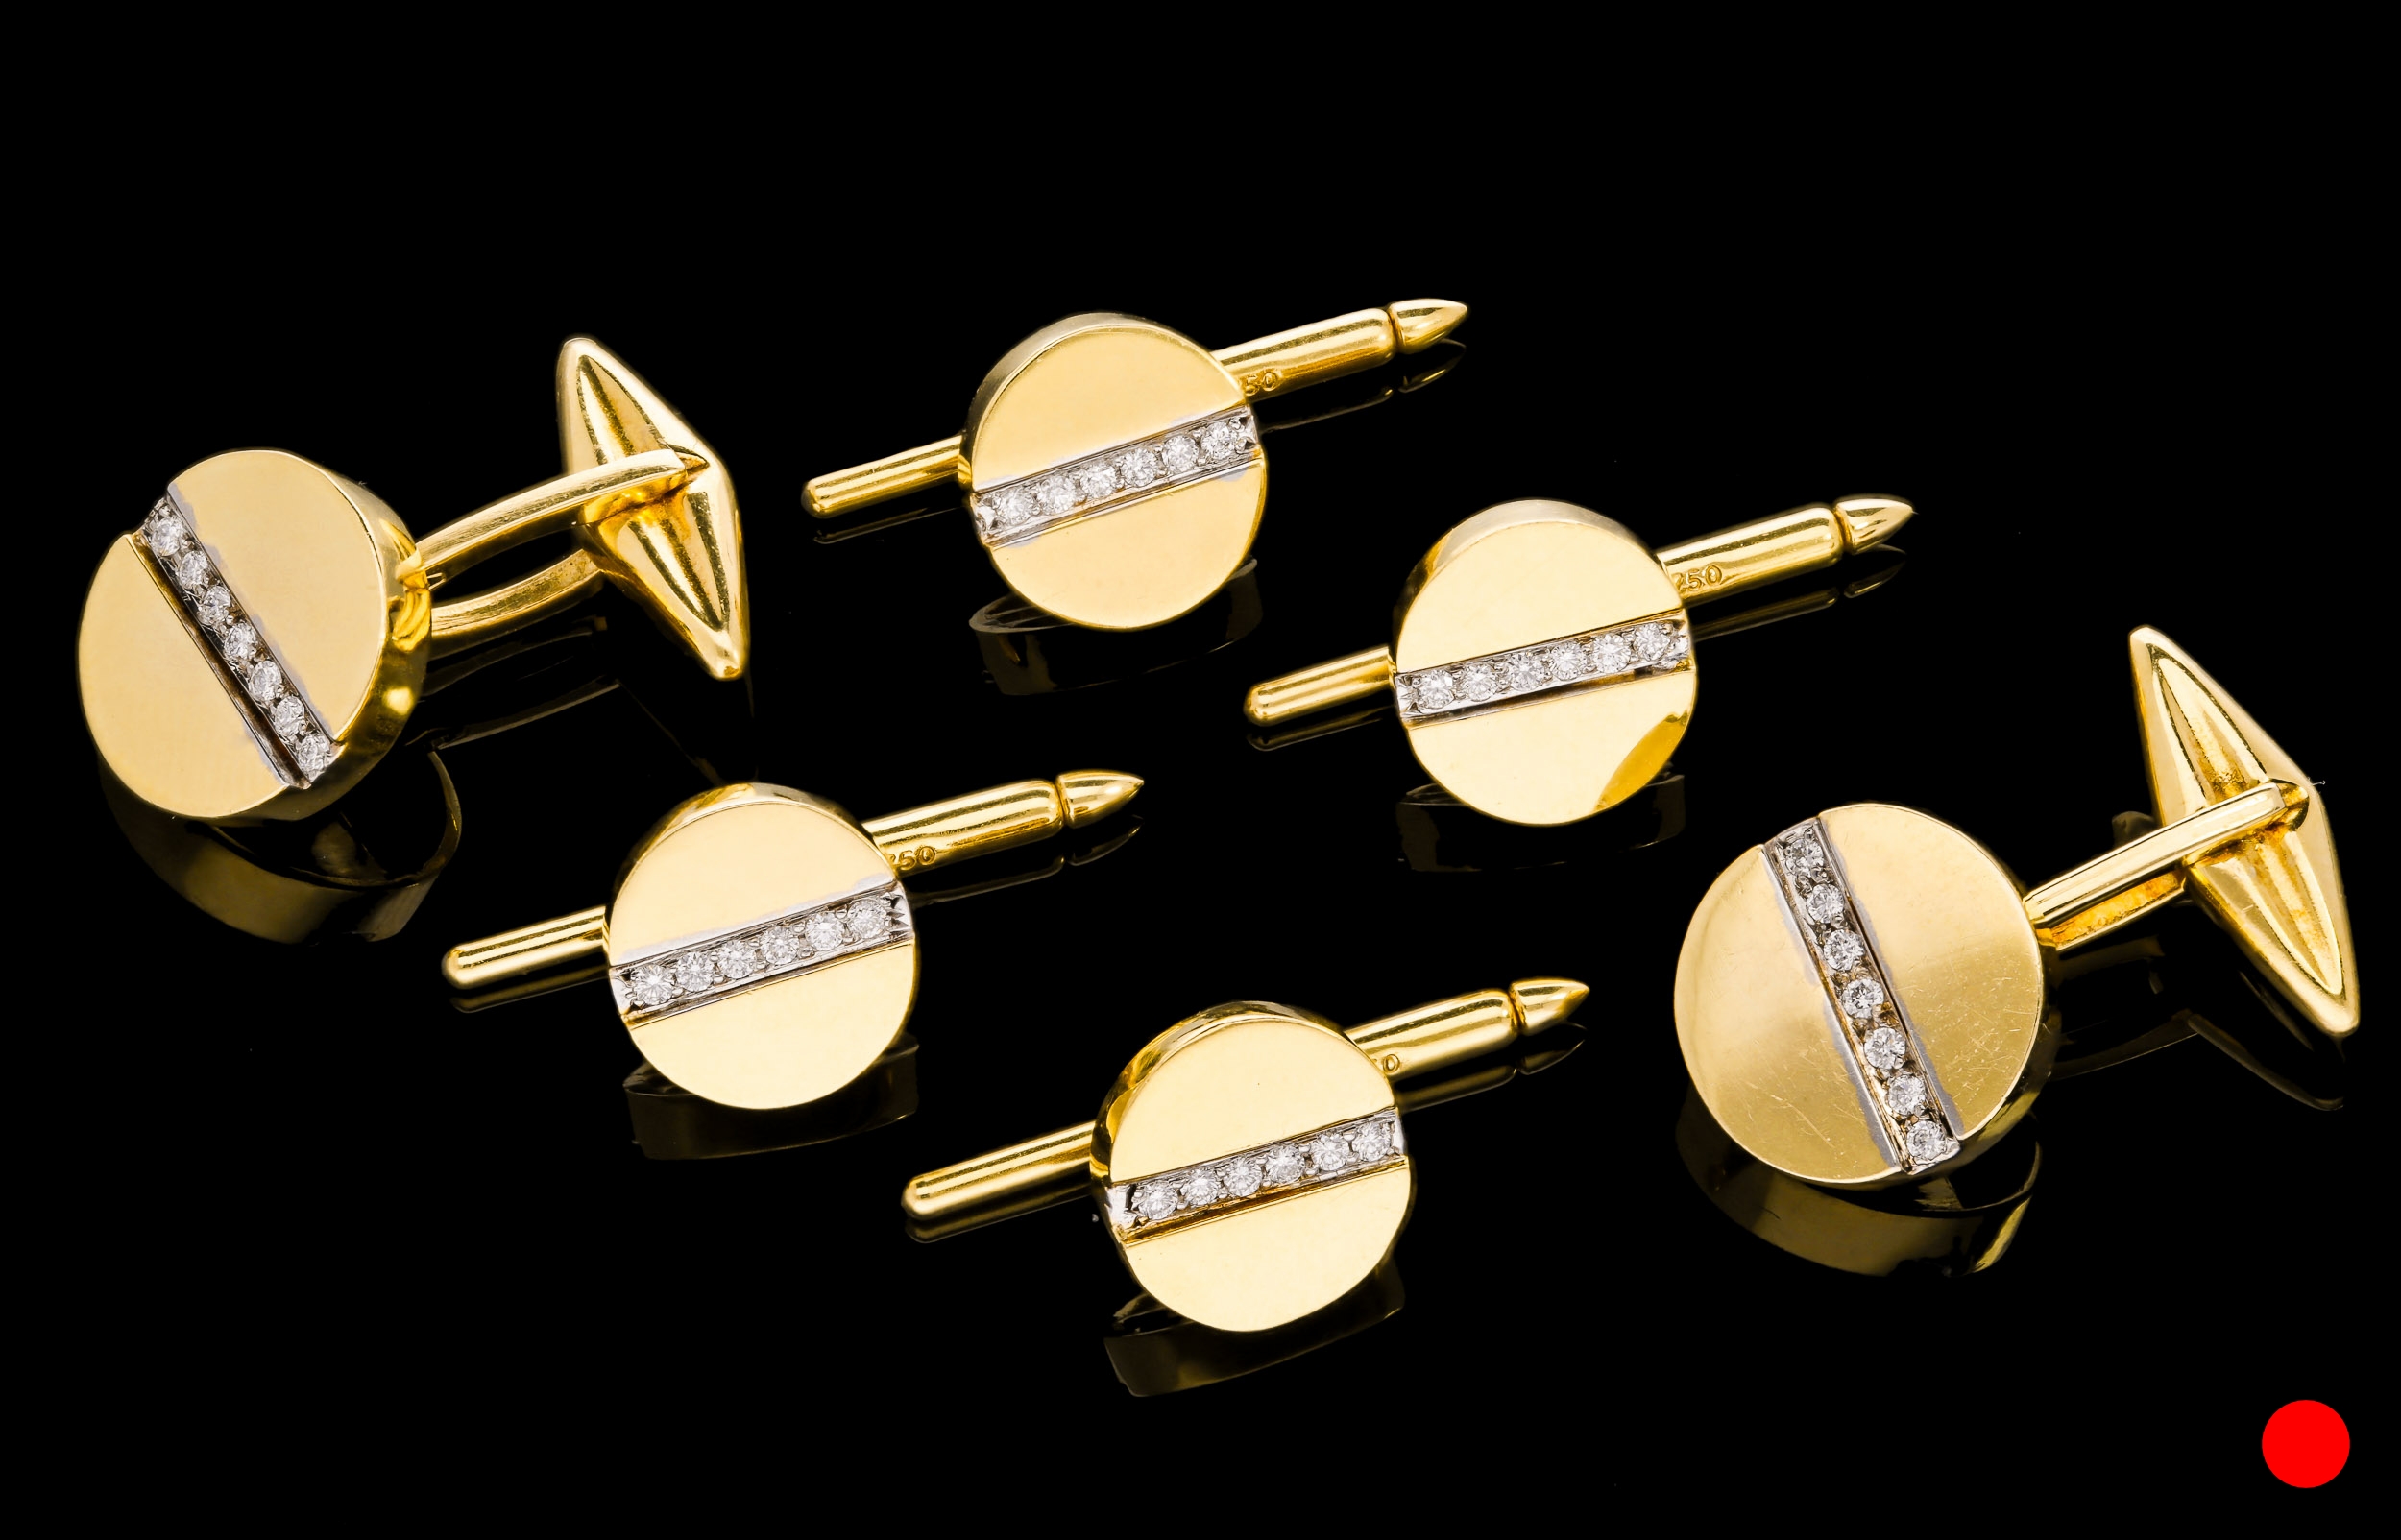 The cufflinks with hinged T-bar fittings |£8500